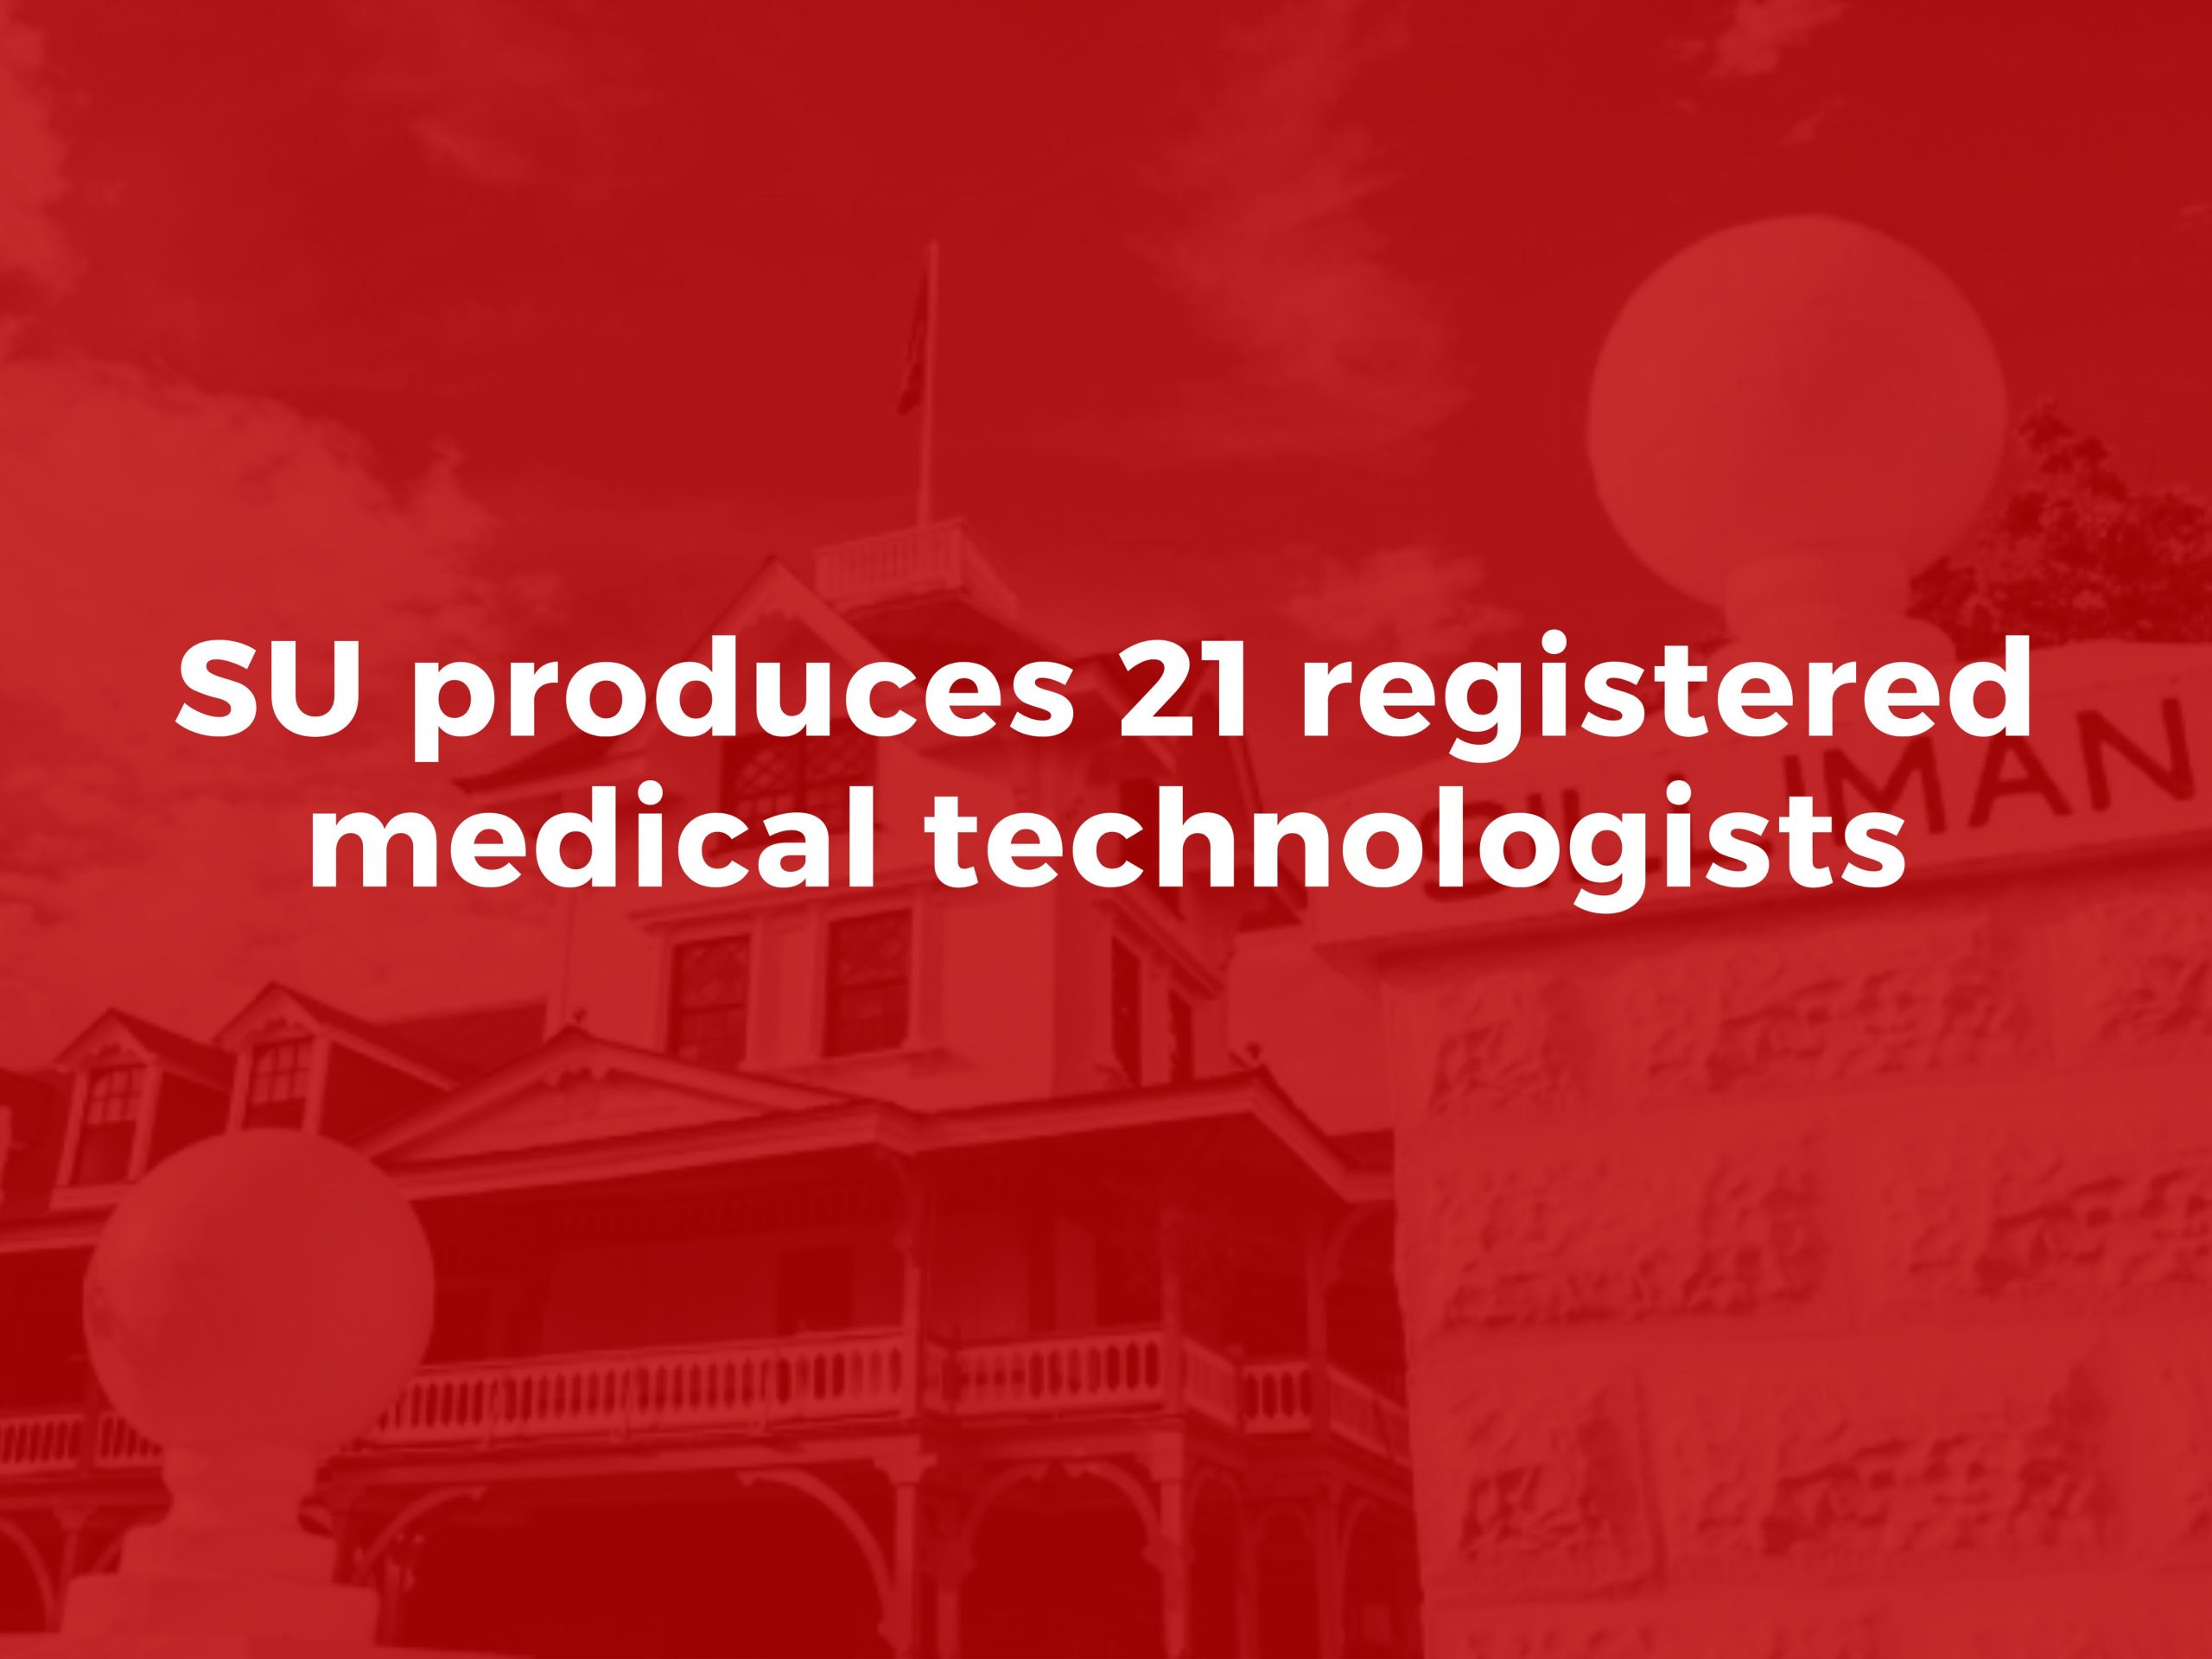 SU produces 21 registered medical technologists